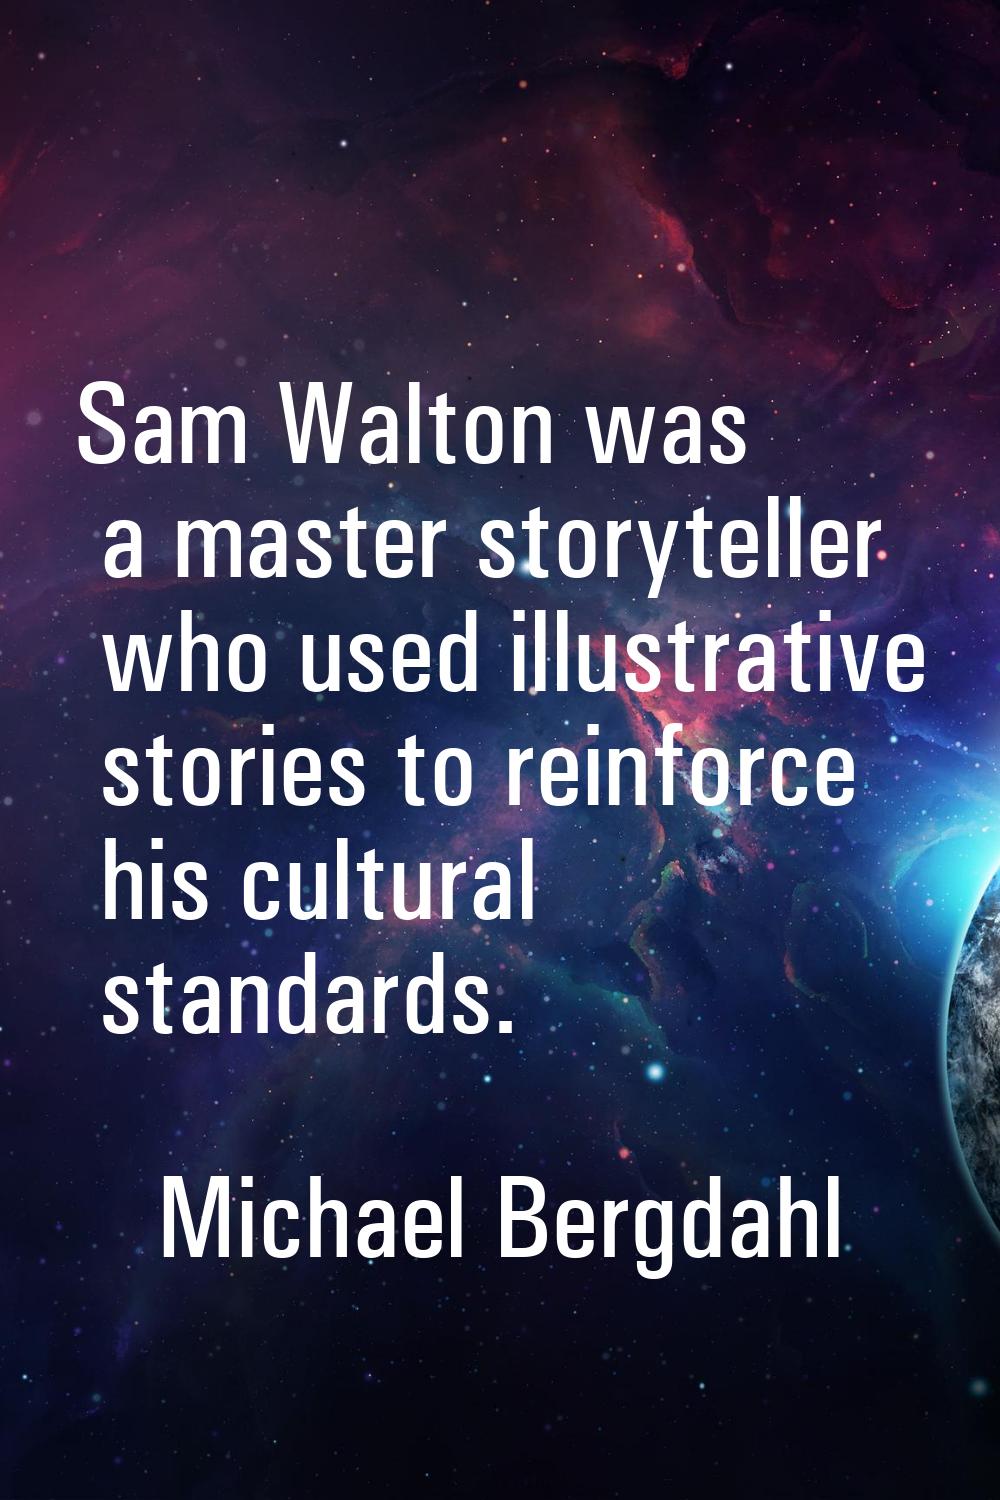 Sam Walton was a master storyteller who used illustrative stories to reinforce his cultural standar